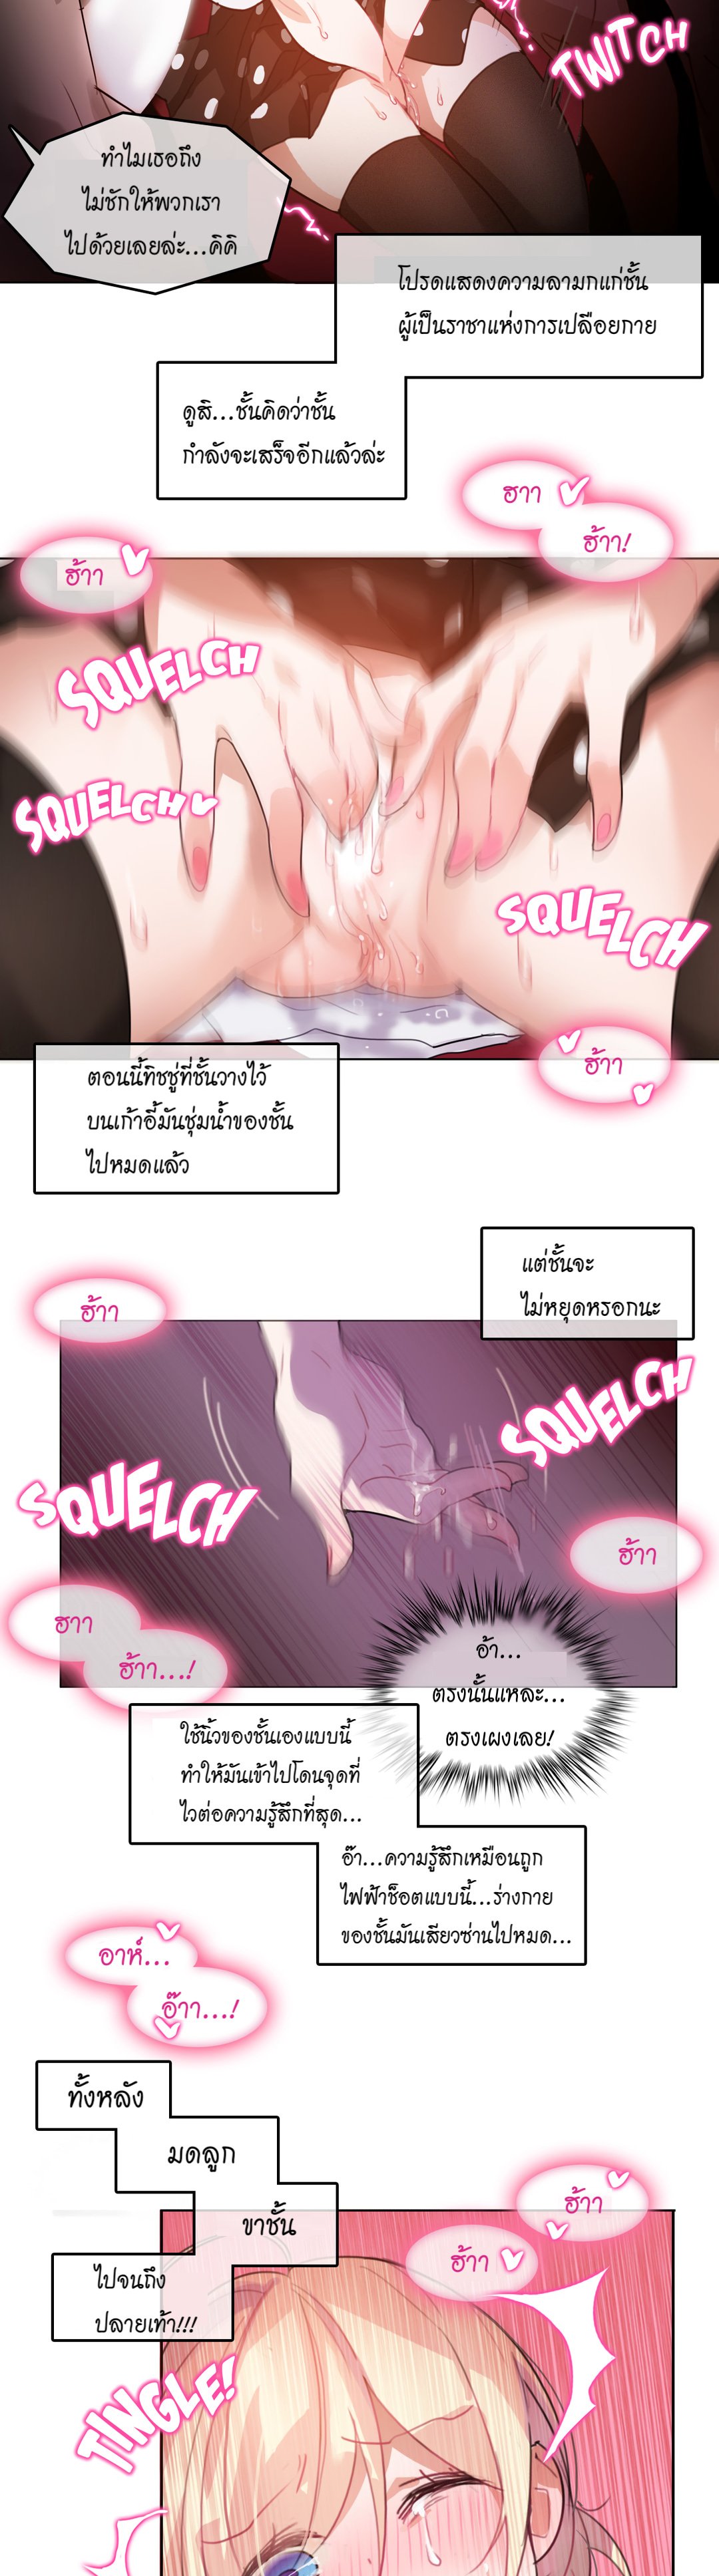 A Pervert’s Daily Life 3 (8)